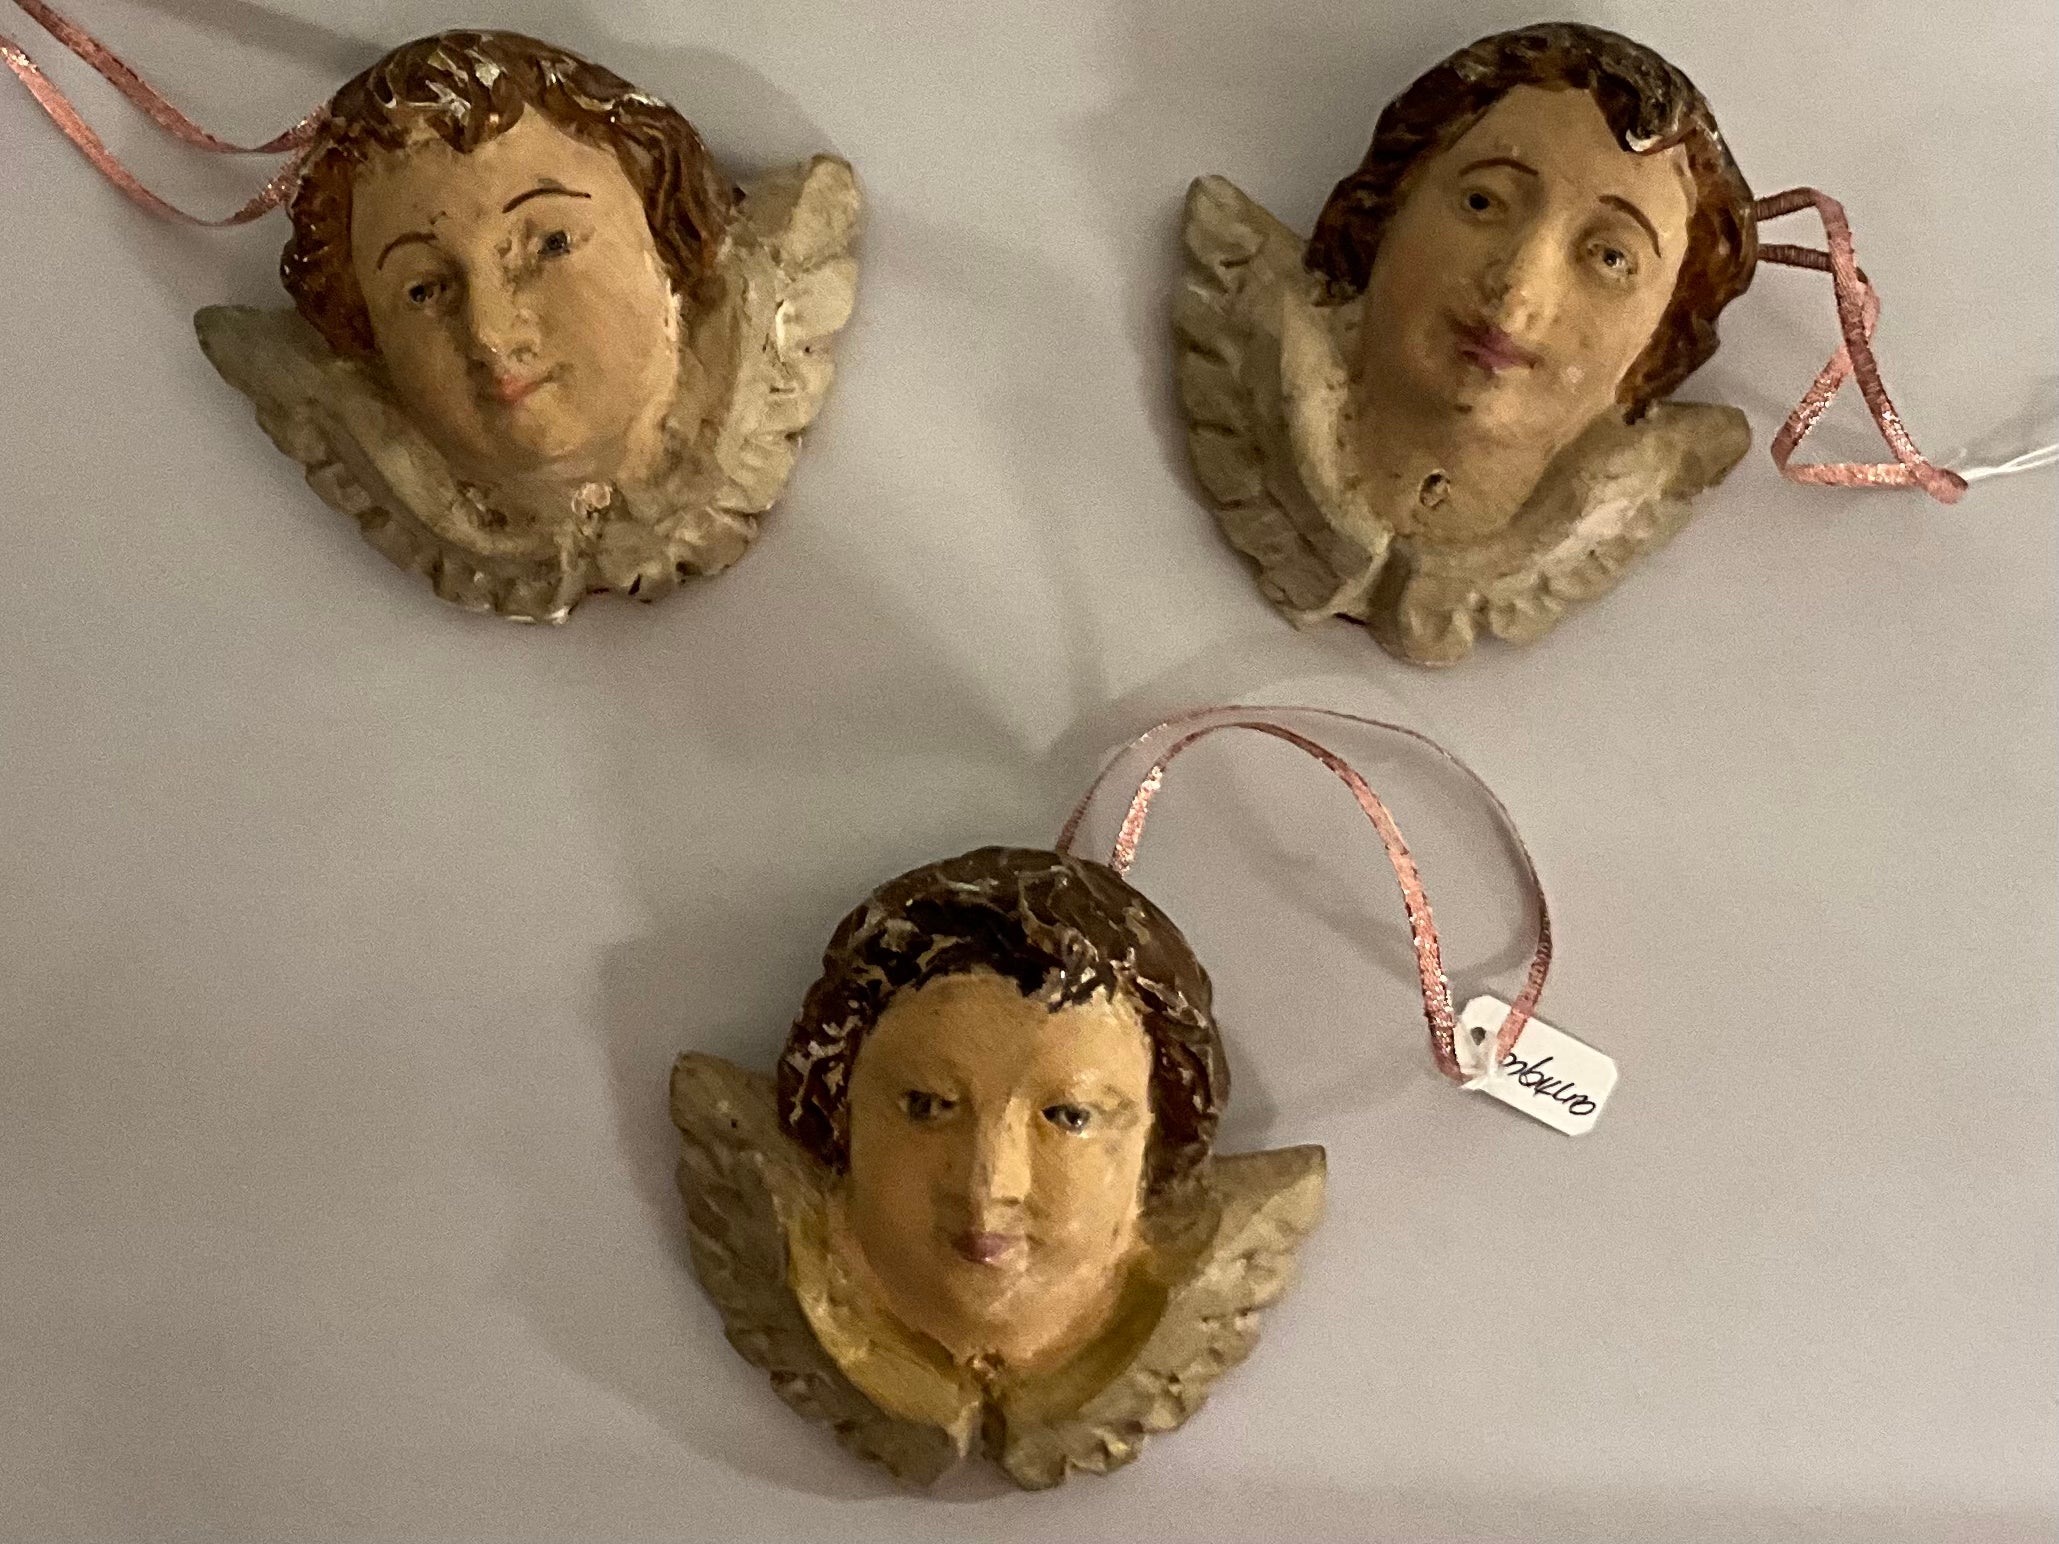 This is a set of three 19th century Rococo style carved puttis that have been modified into holiday ornaments. They are hand painted and show some age appropriate wear. Many of the little eyes are glass.